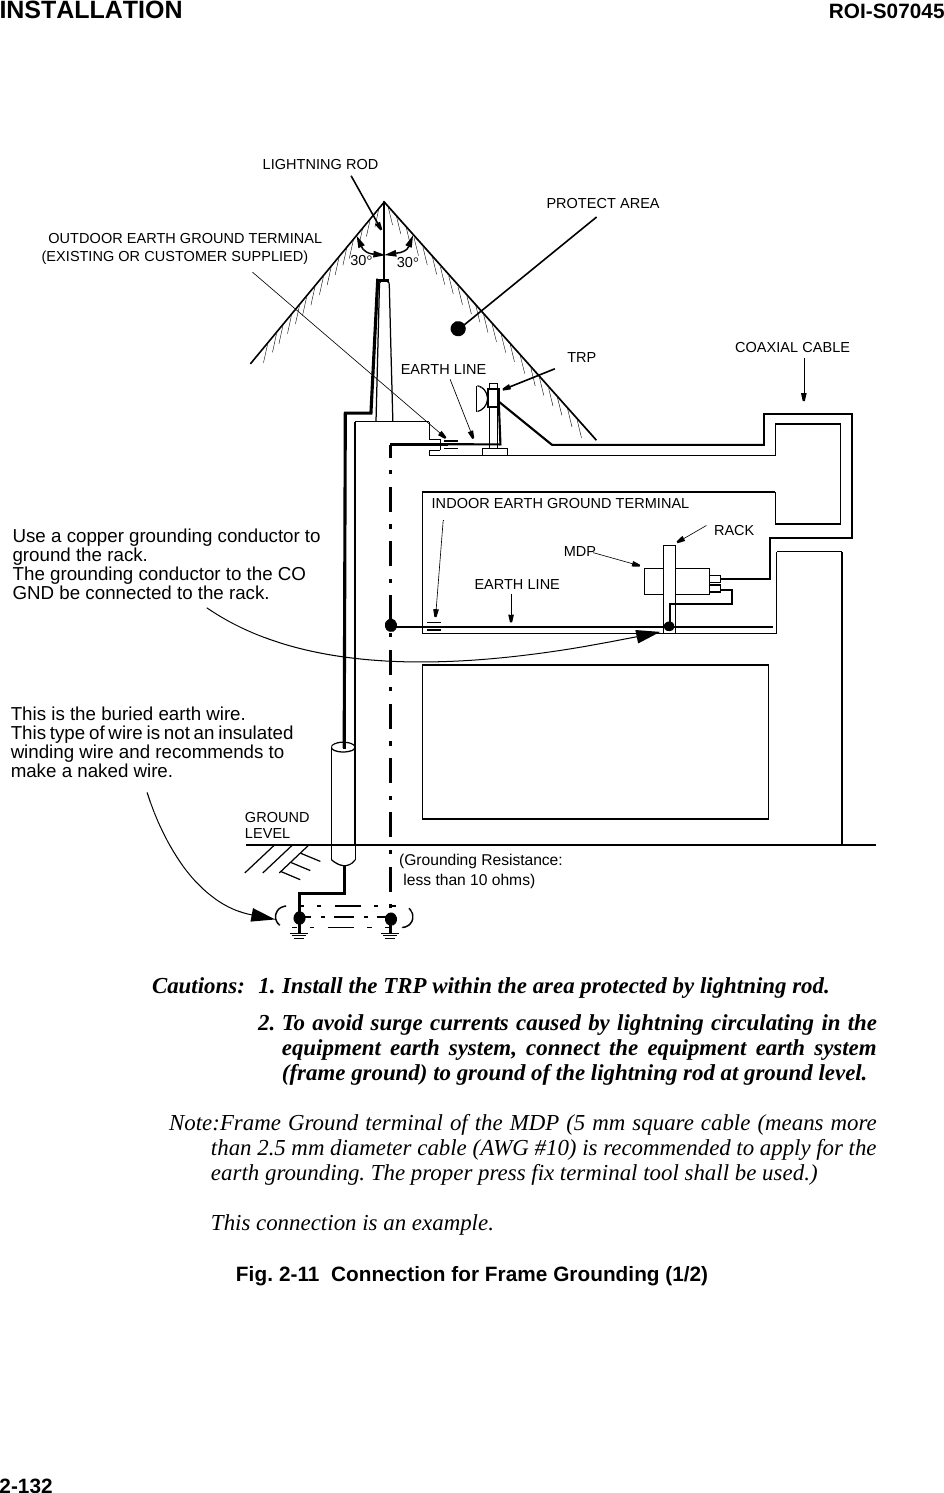 INSTALLATION ROI-S070452-132Fig. 2-11  Connection for Frame Grounding (1/2)EARTH LINEINDOOR EARTH GROUND TERMINALMDPTRP COAXIAL CABLEPROTECT AREALIGHTNING RODOUTDOOR EARTH GROUND TERMINAL(EXISTING OR CUSTOMER SUPPLIED)EARTH LINEGROUNDLEVELCautions: 1. Install the TRP within the area protected by lightning rod.2. To avoid surge currents caused by lightning circulating in theequipment earth system, connect the equipment earth system(frame ground) to ground of the lightning rod at ground level.   Note:Frame Ground terminal of the MDP (5 mm square cable (means morethan 2.5 mm diameter cable (AWG #10) is recommended to apply for theearth grounding. The proper press fix terminal tool shall be used.)This connection is an example.RACK30°30°(Grounding Resistance: less than 10 ohms)This is the buried earth wire.This type of wire is not an insulated winding wire and recommends to make a naked wire.Use a copper grounding conductor to ground the rack.The grounding conductor to the CO GND be connected to the rack.